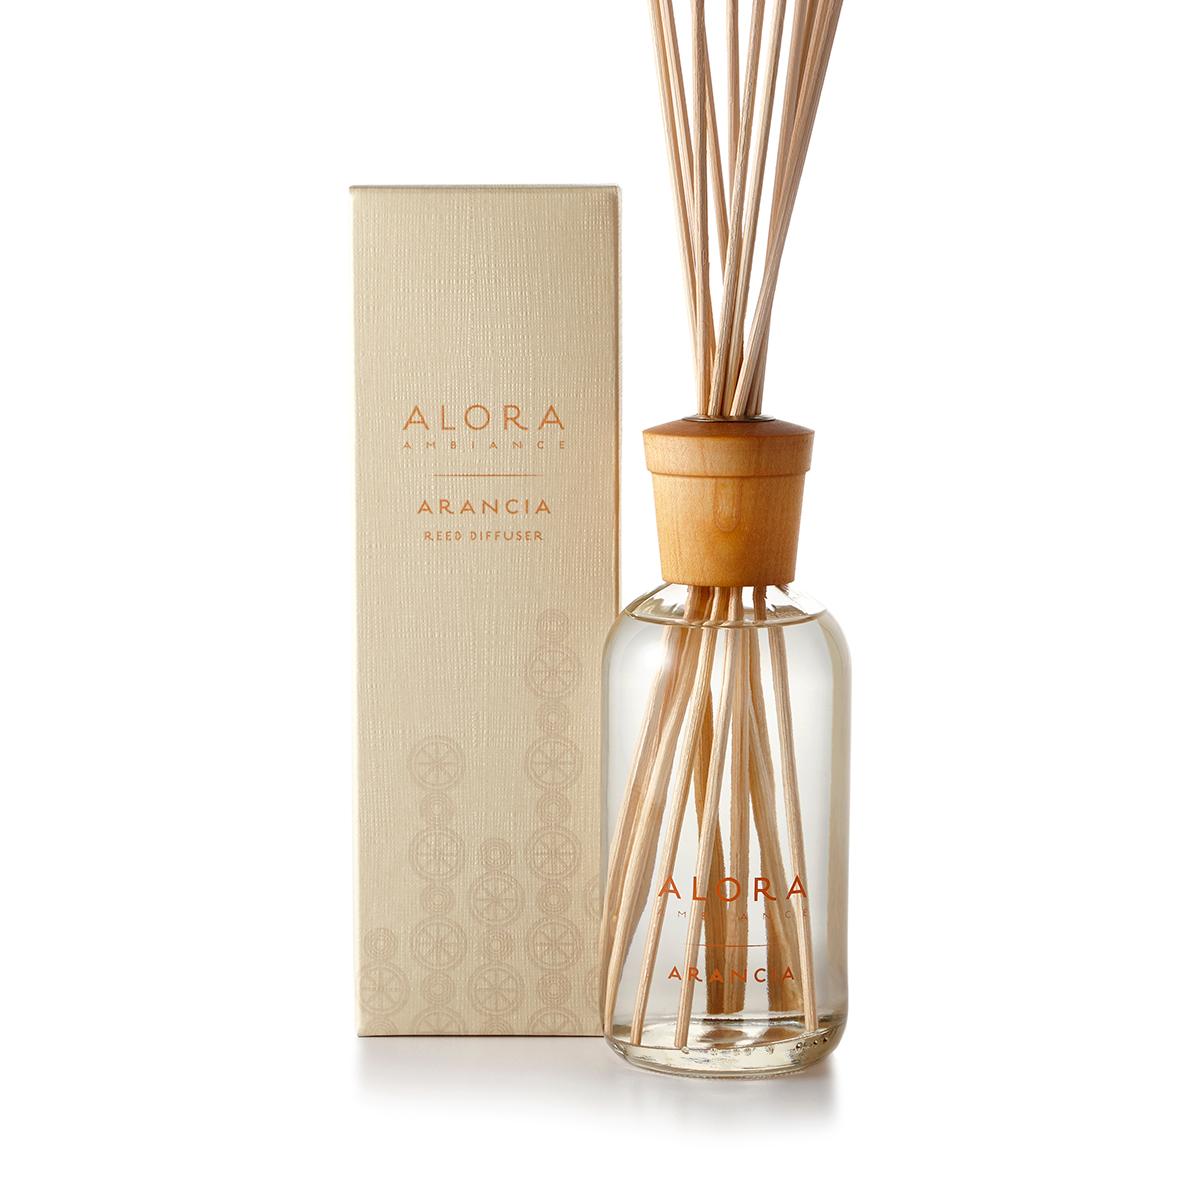 Primary image of Arancia Reed Diffuser